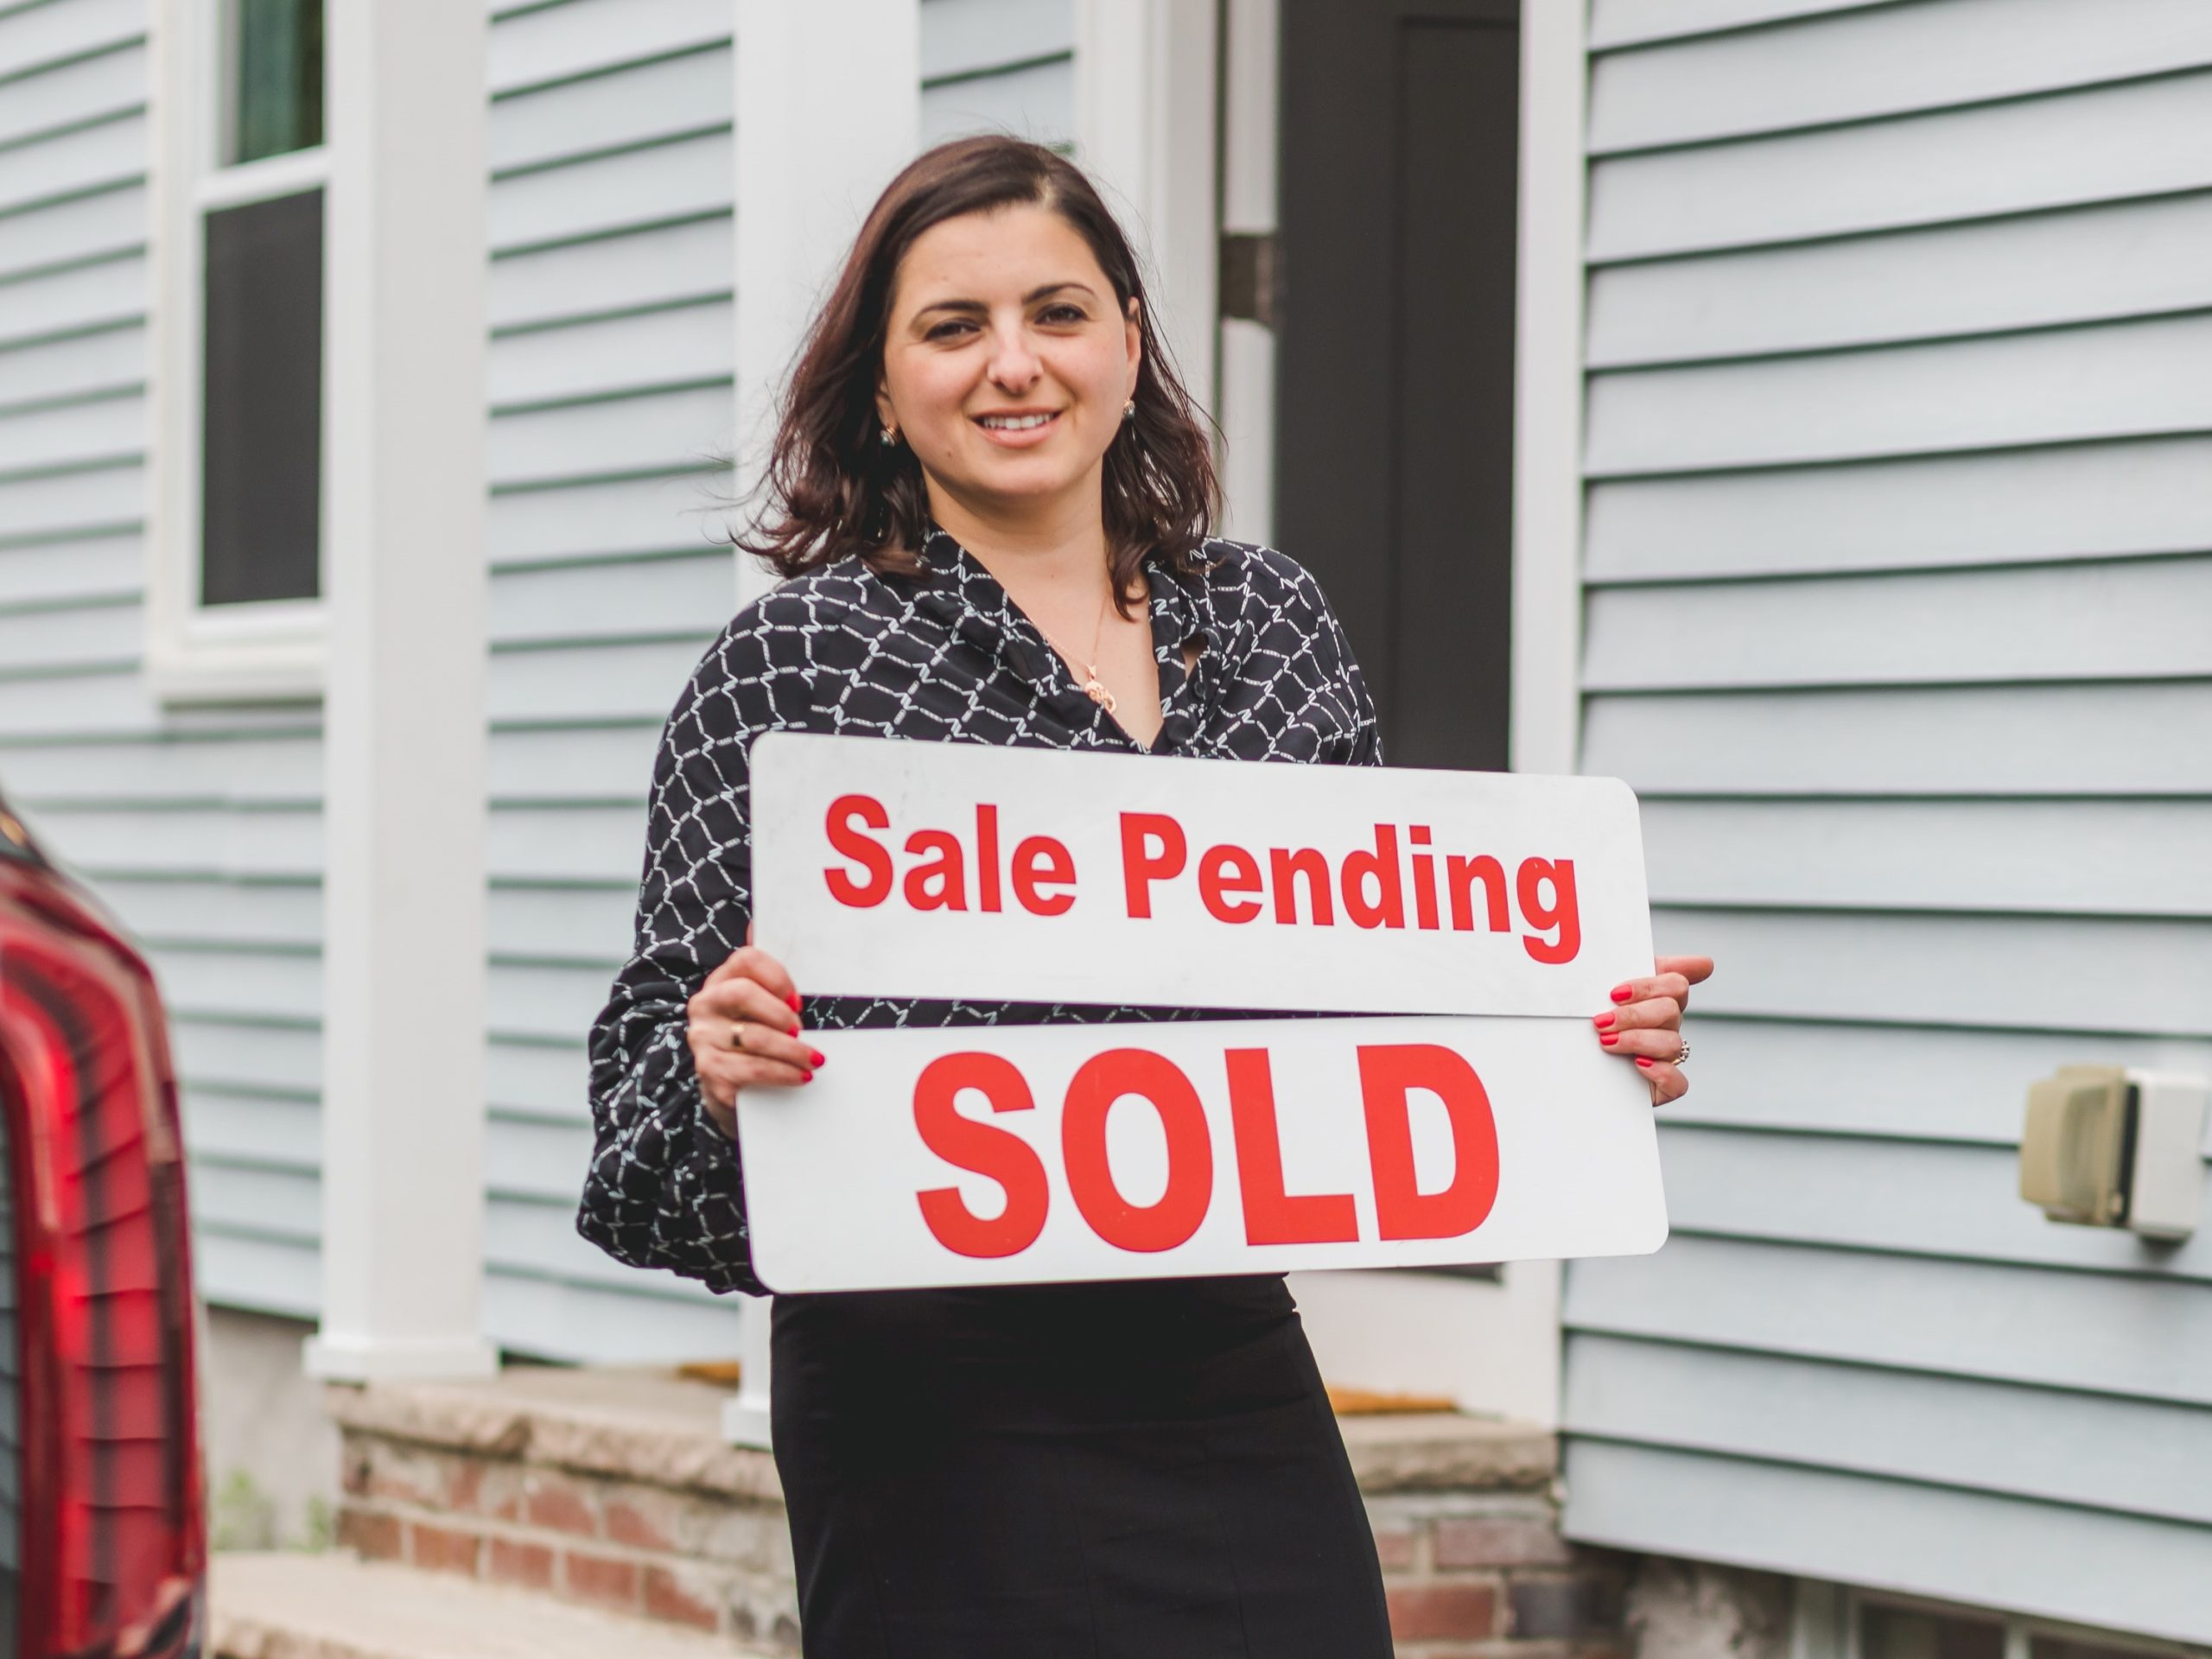 What Does Pending Mean in Real Estate?